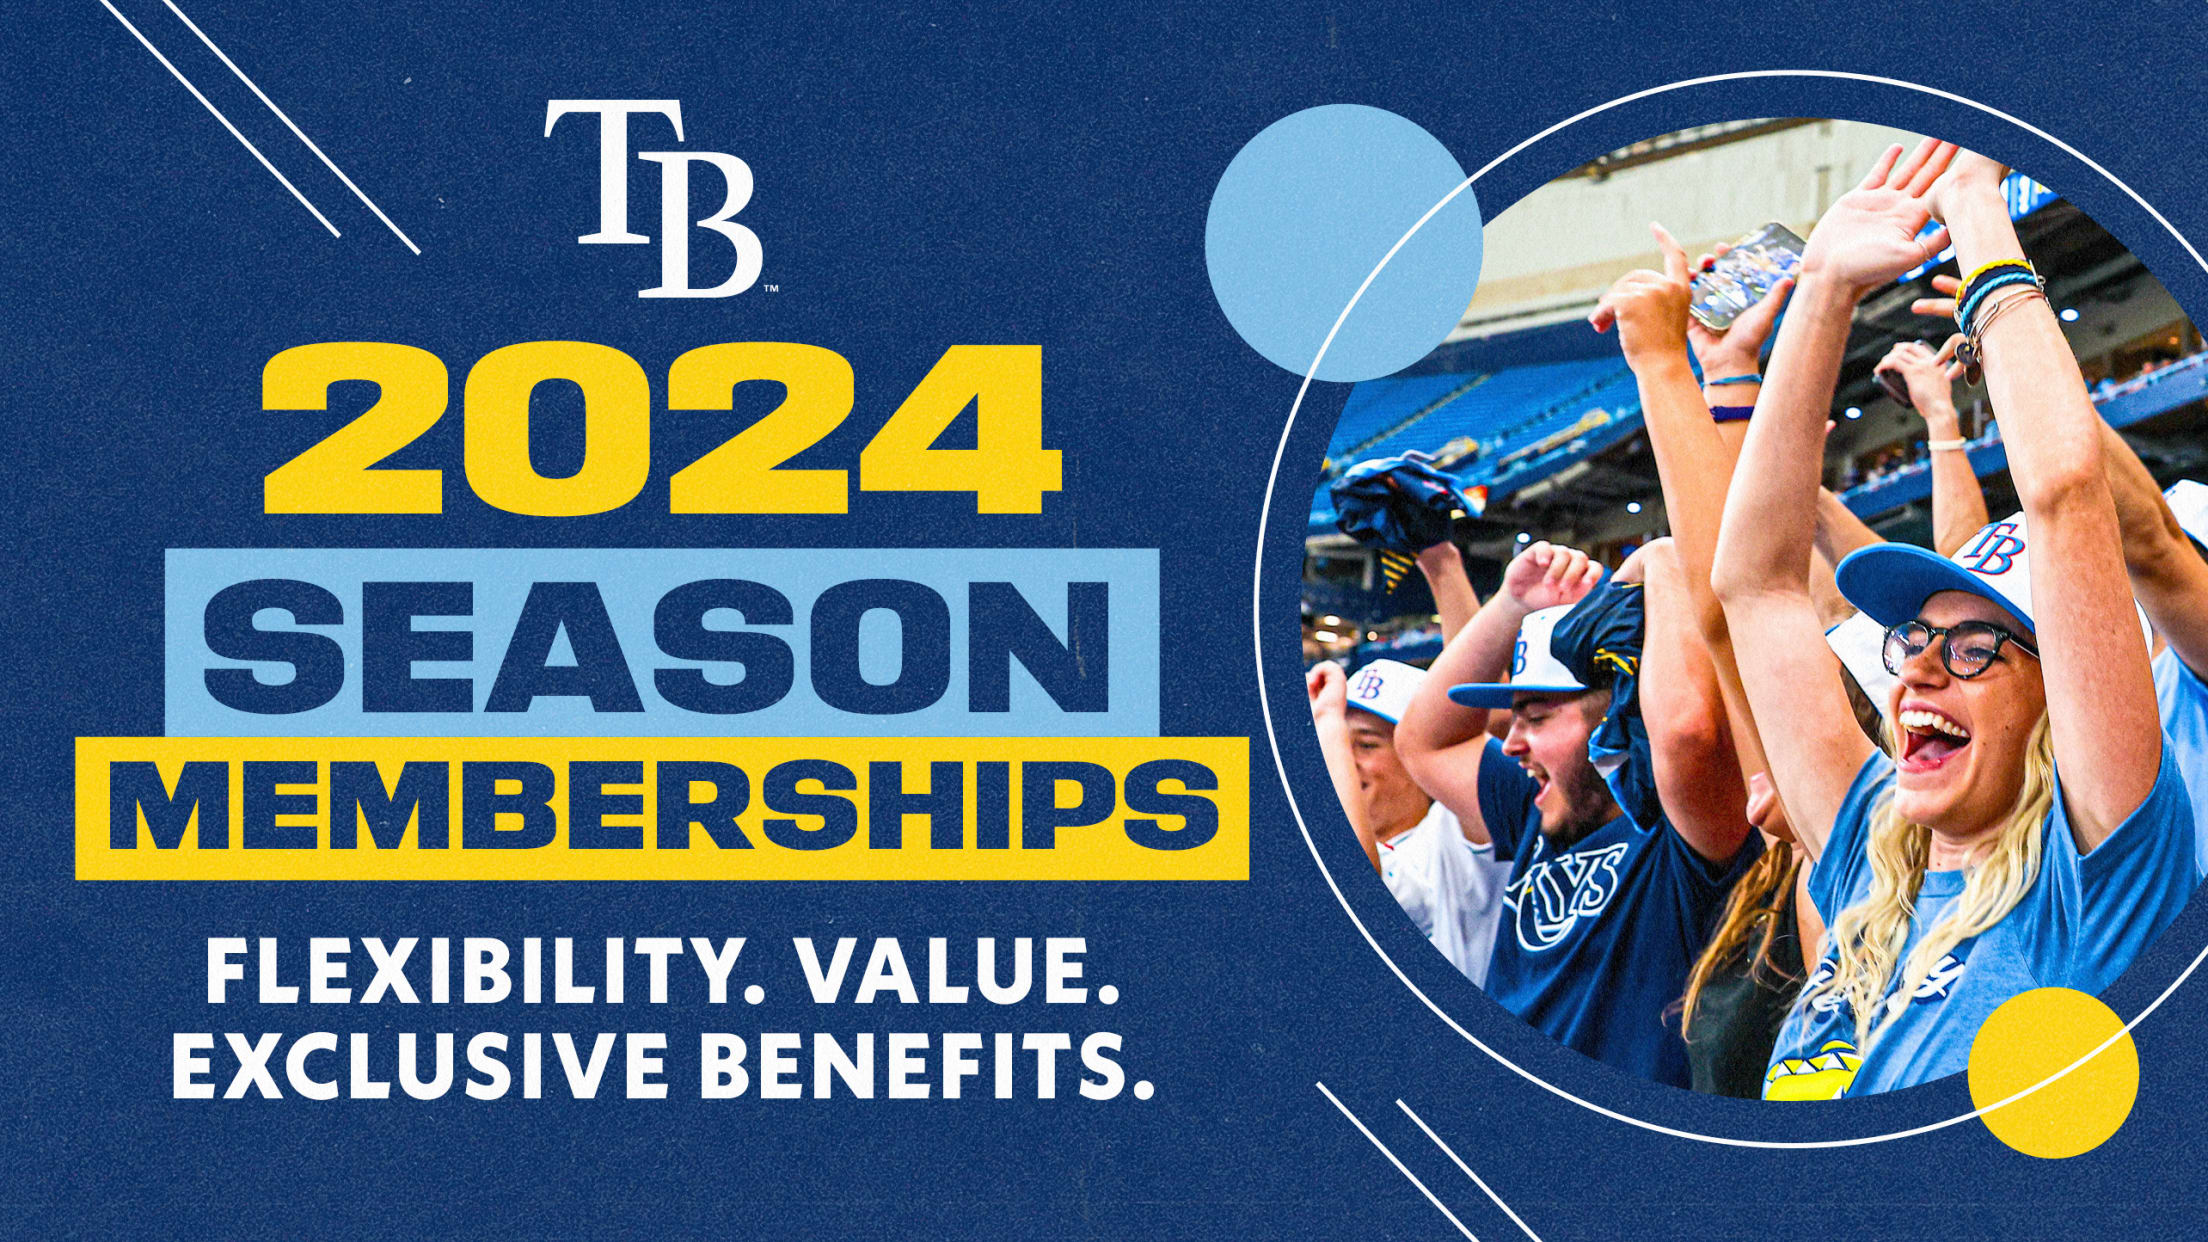 Rays to offer $10 tickets for all 2023 home games